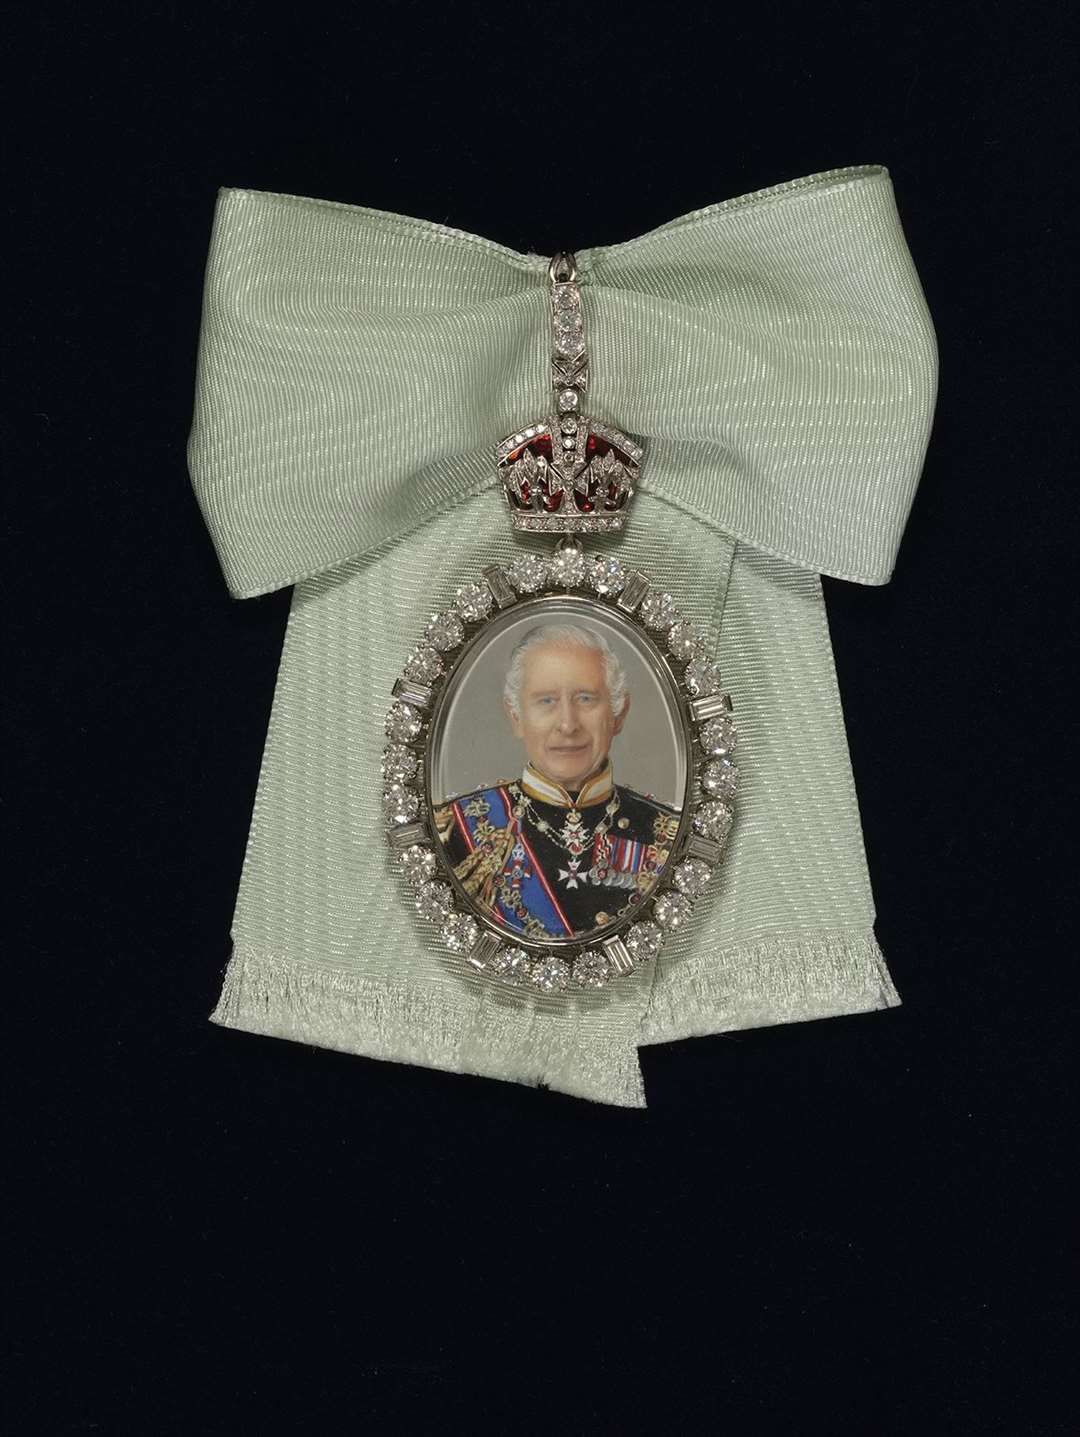 The new King Charles III Family Order (Buckingham Palace/PA)